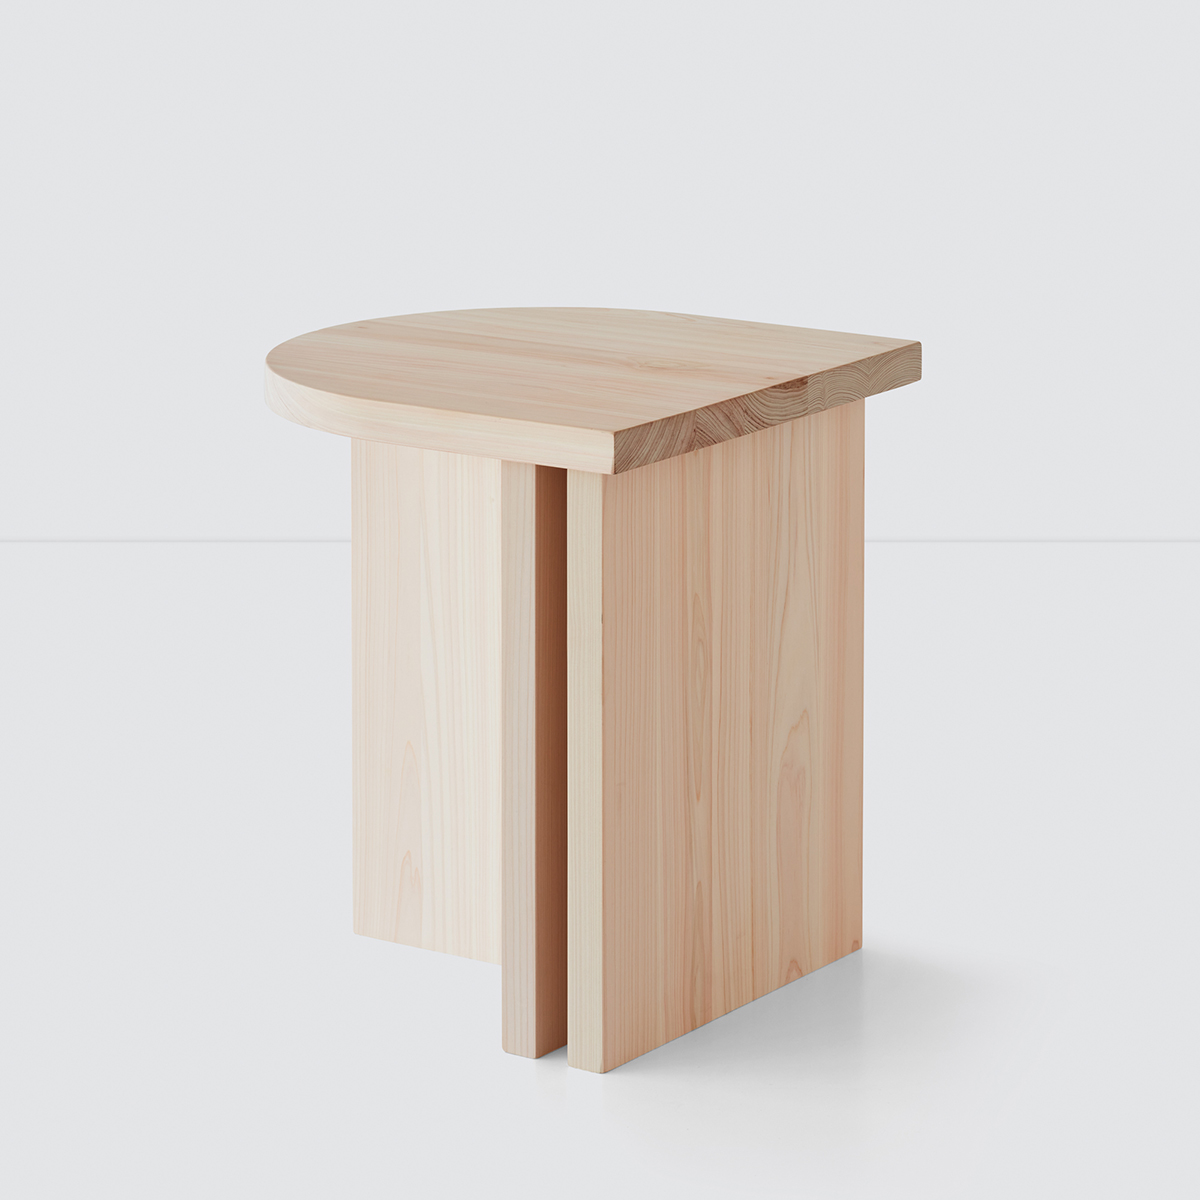 https://www.containerstore.com/catalogimages/499223/10096053-Hinoki_Wood_Side_Table_Half.jpg